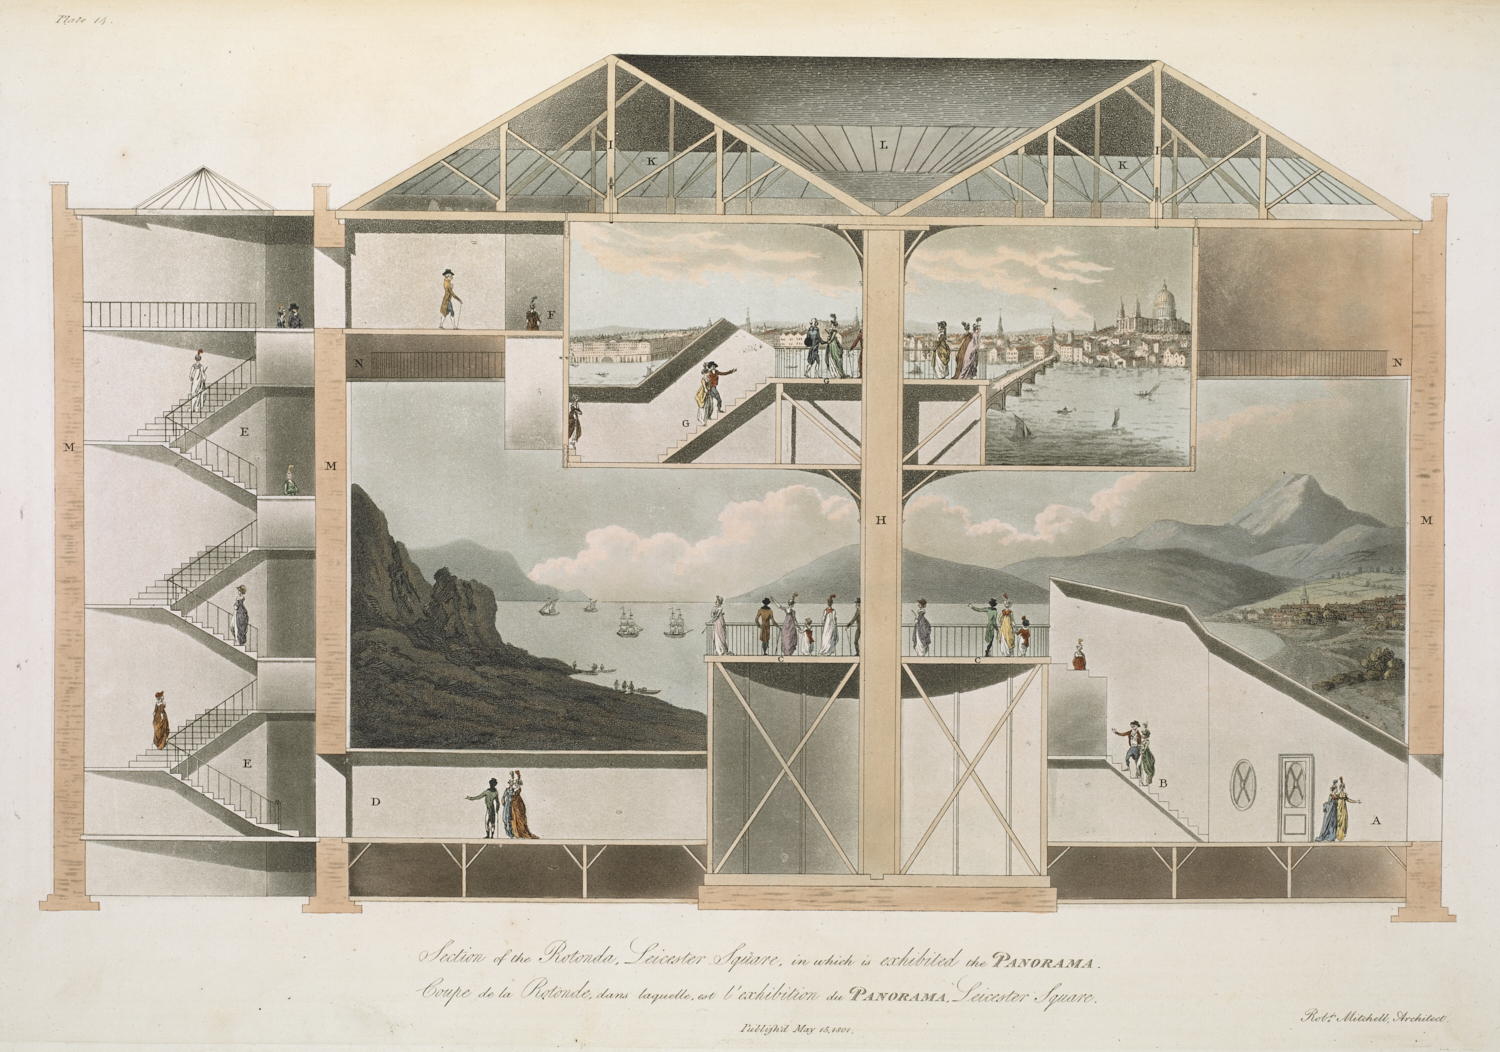 Robert Barker's panoramic rooms
          in Leicester Square, London